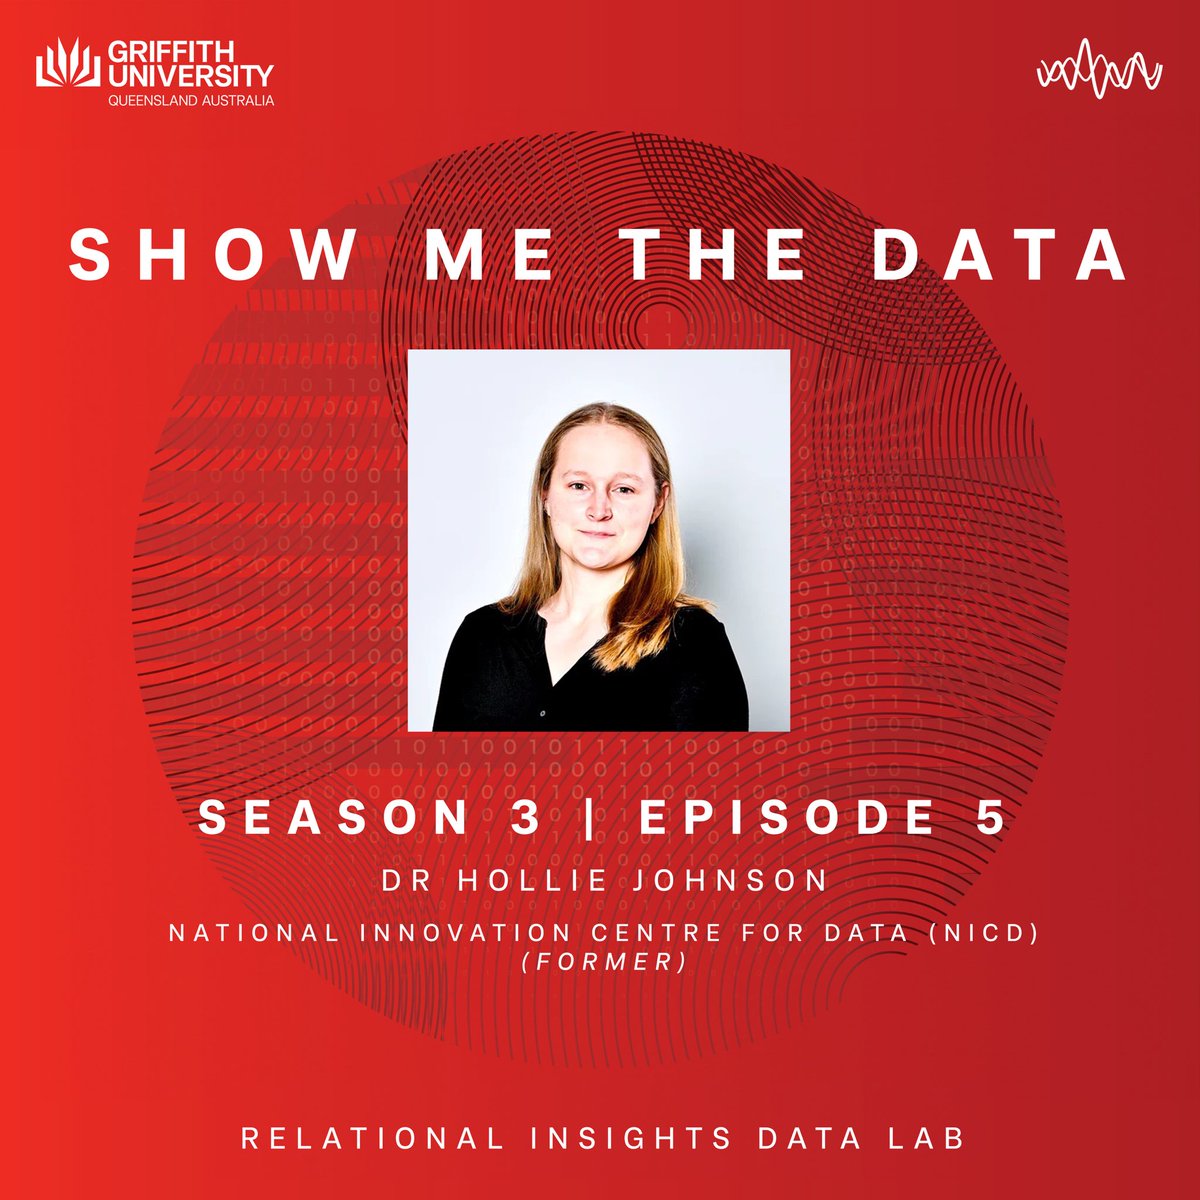 🌍 On this #ScientistsDay, we go international with our special guest from Newcastle UK, Dr Hollie Johnson, ex-Senior Data Scientist at @NICDATA. Join us for the season finale as we explore how NICD is transforming the data space in Northeast England. ridl.com.au/show-me-the-da…